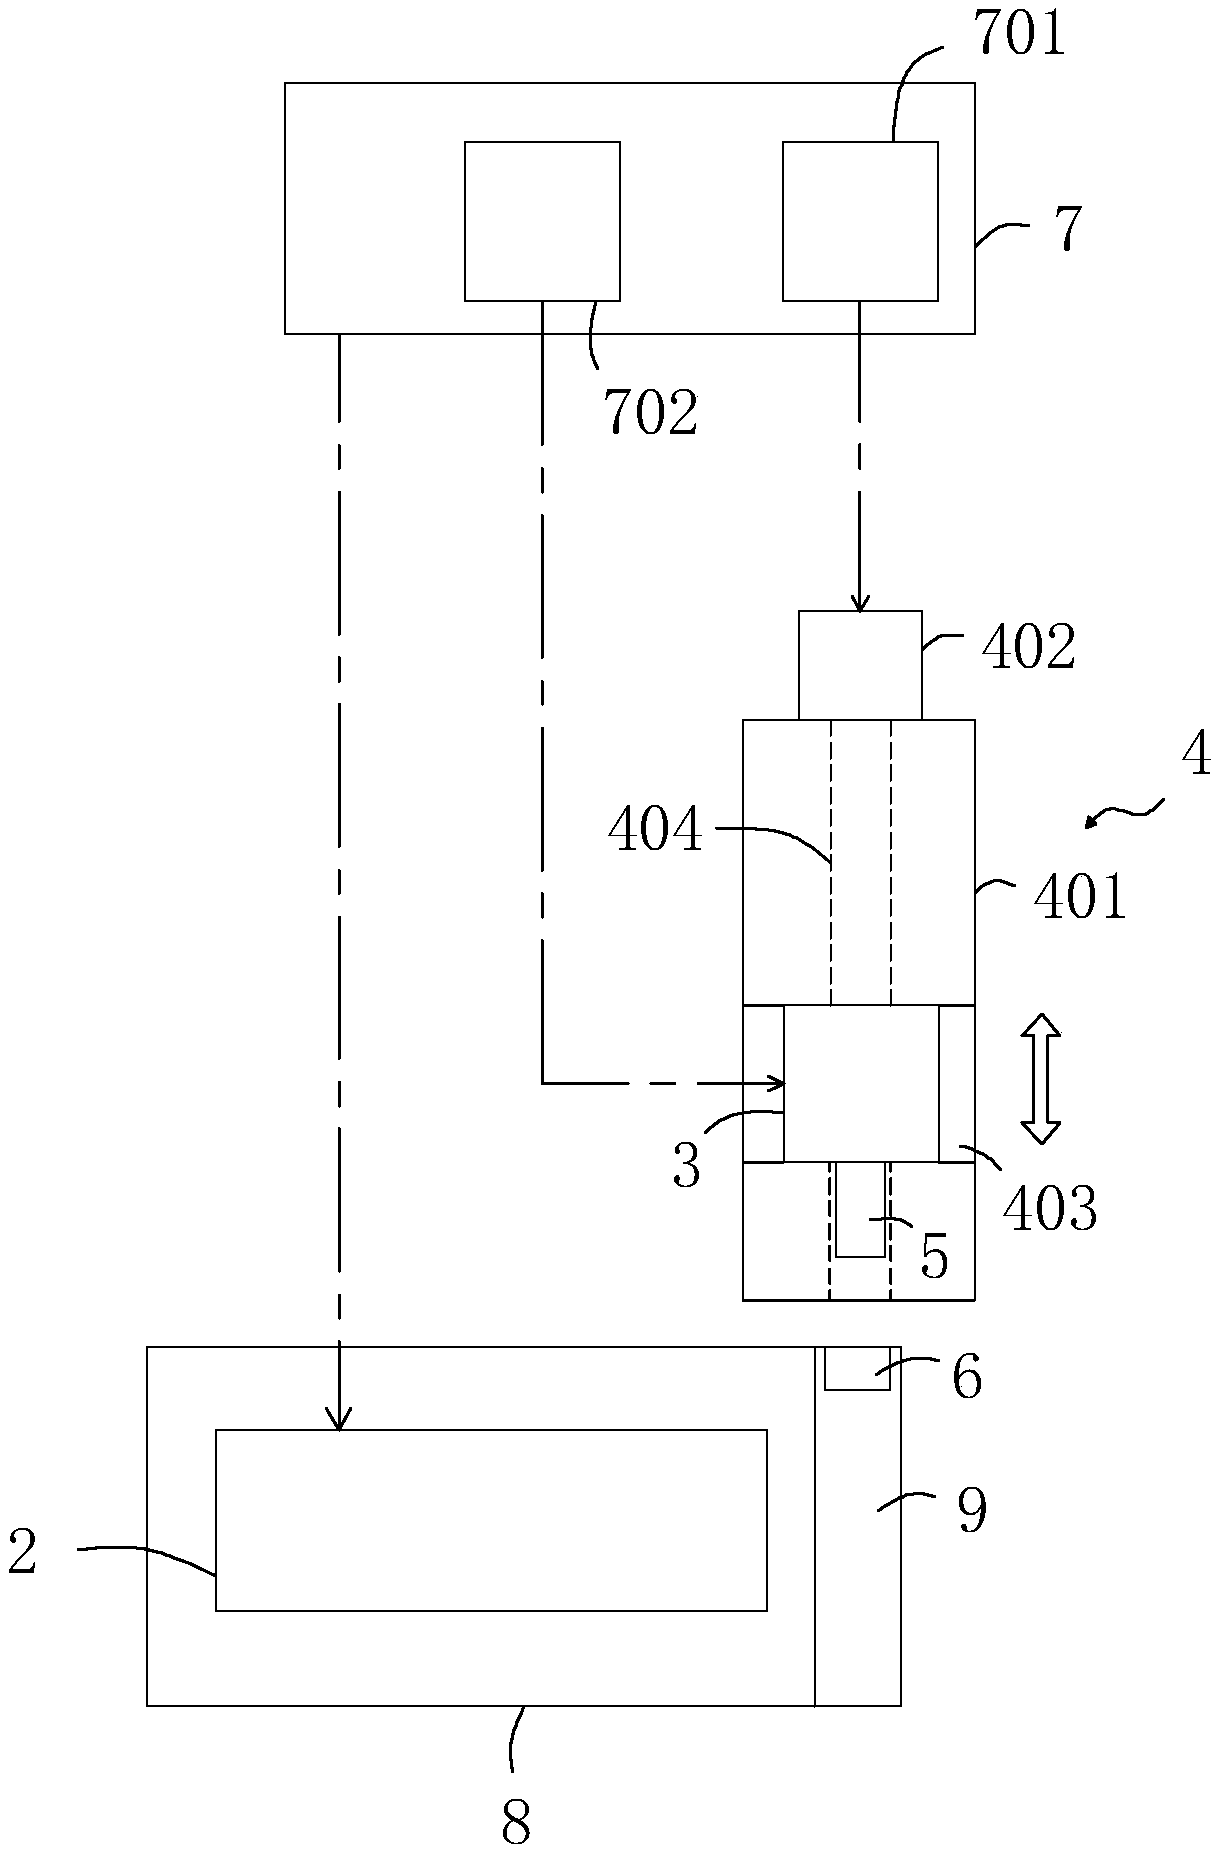 A system and method for automatically limiting power consumption of an electric vehicle